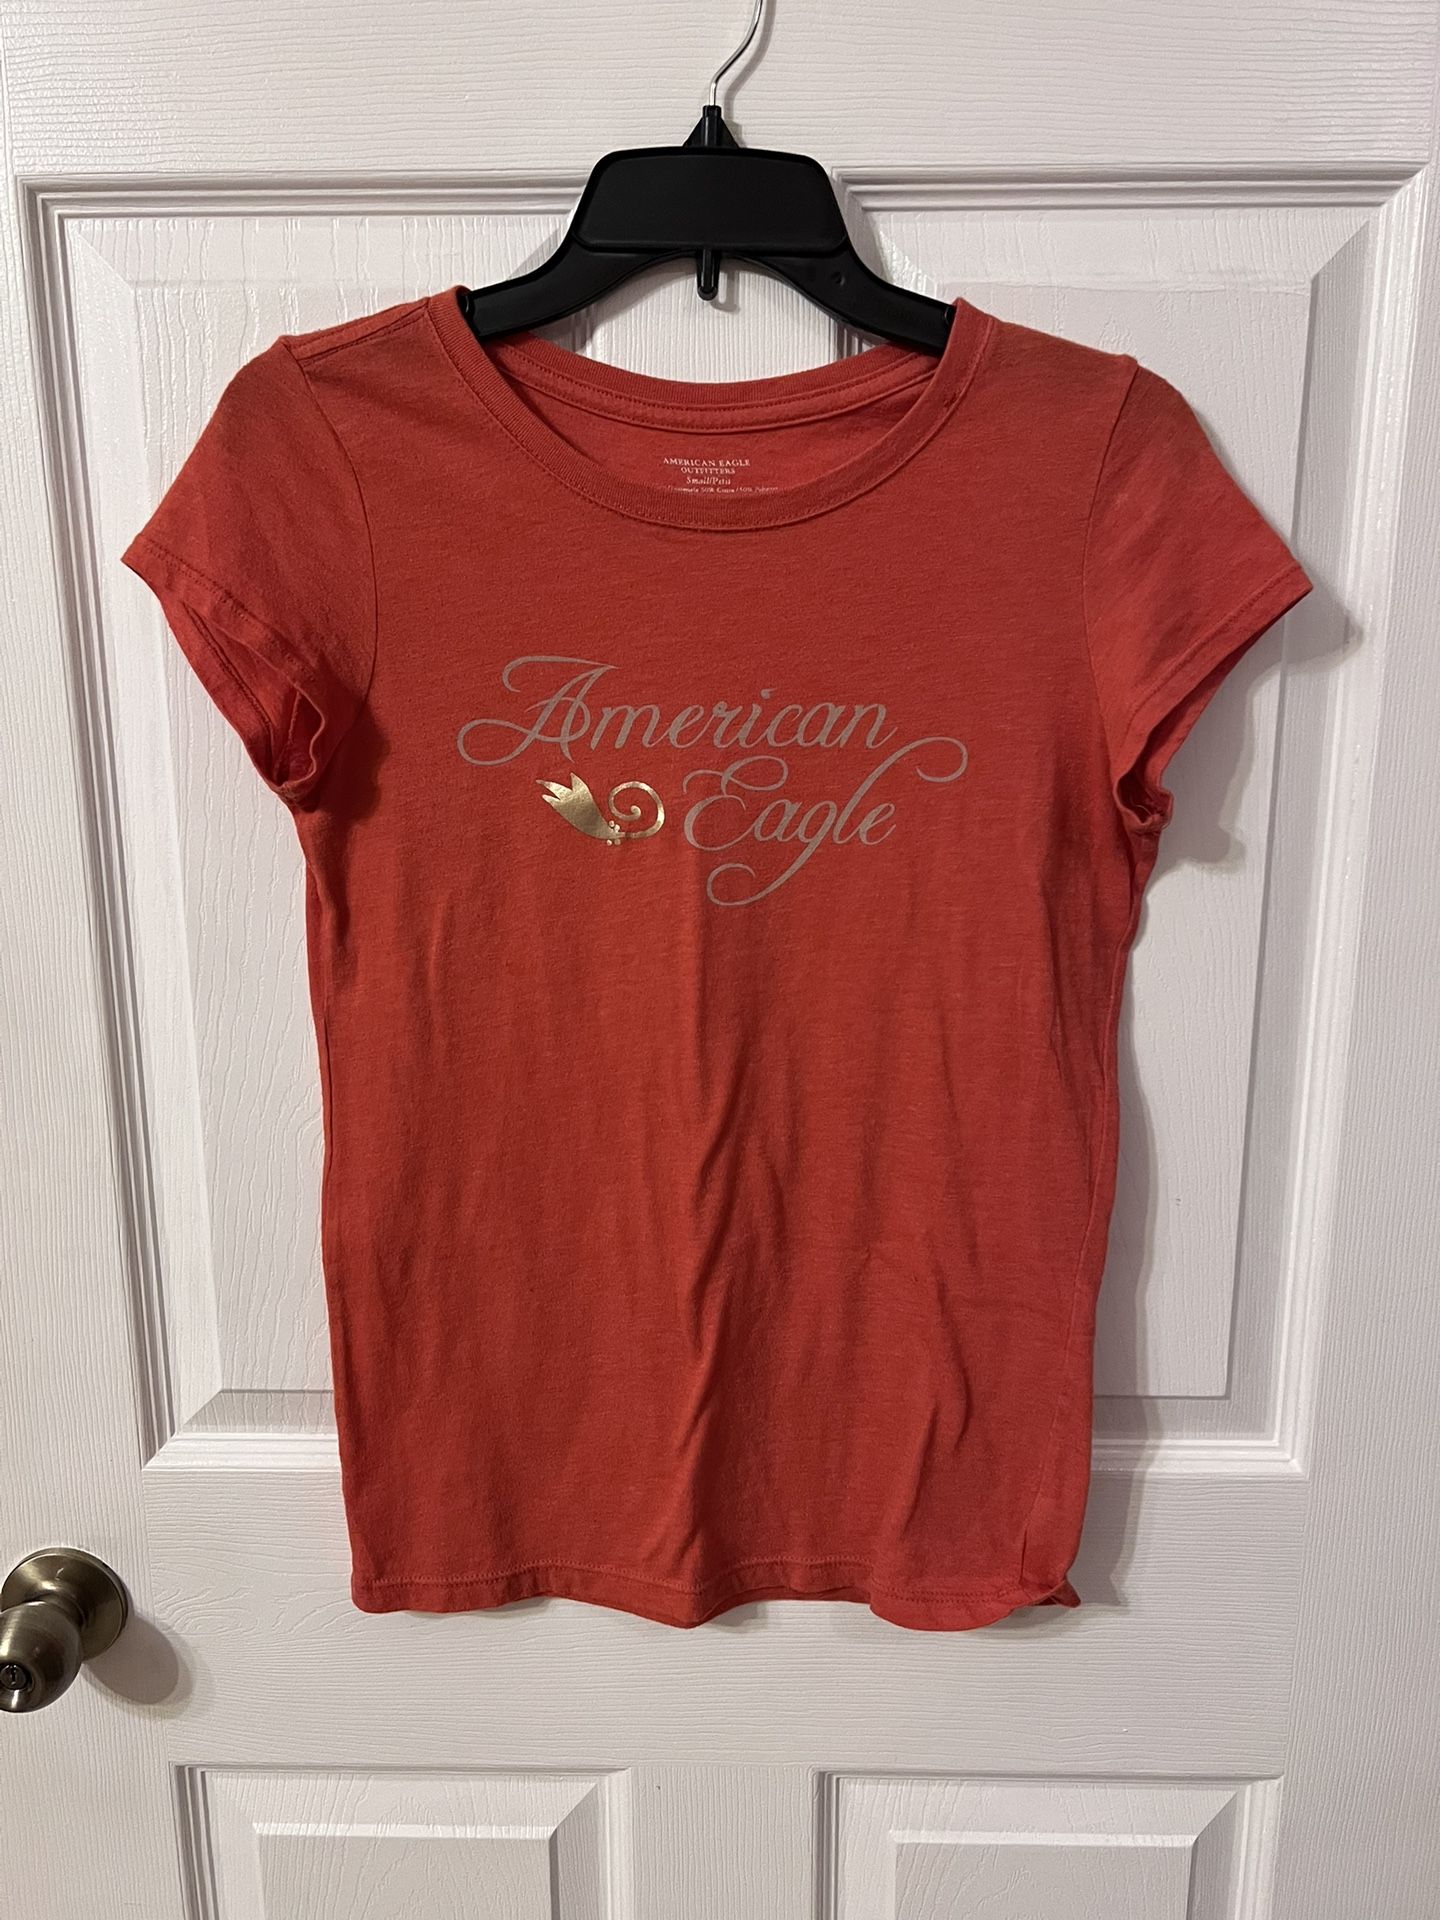 American Eagle shirt, size small